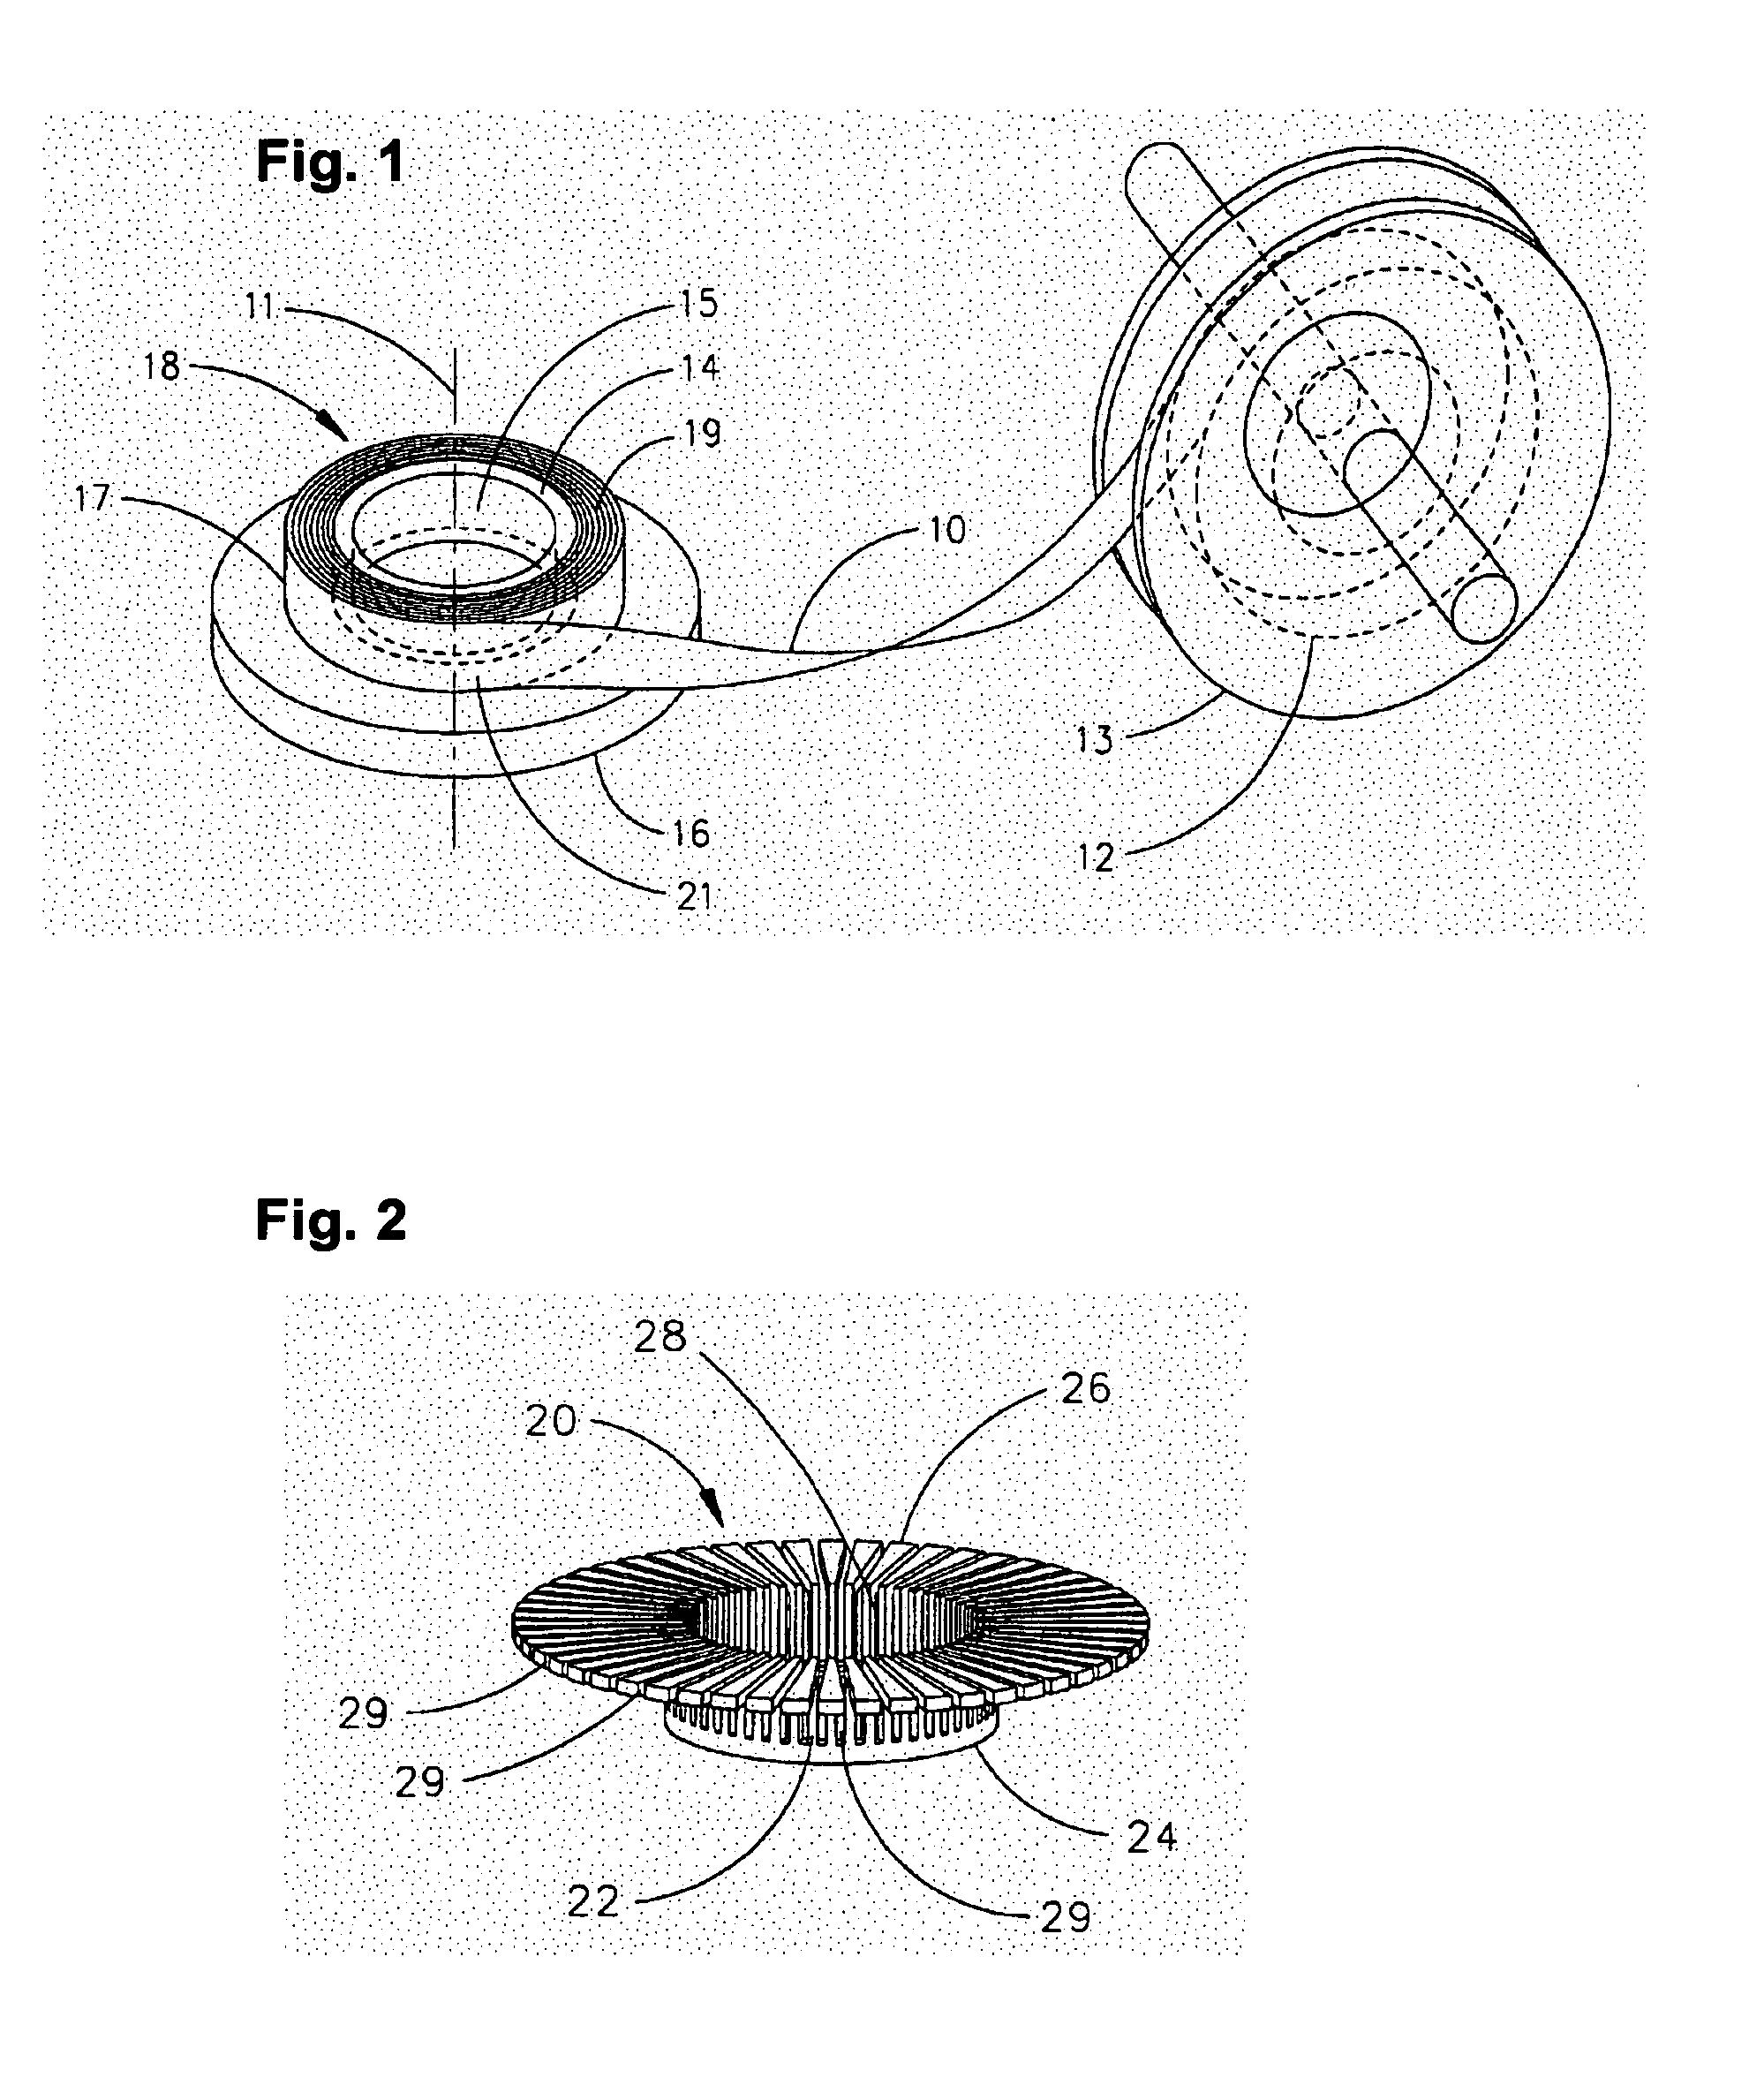 Soft magnetic amorphous electromagnetic component and method for making the same